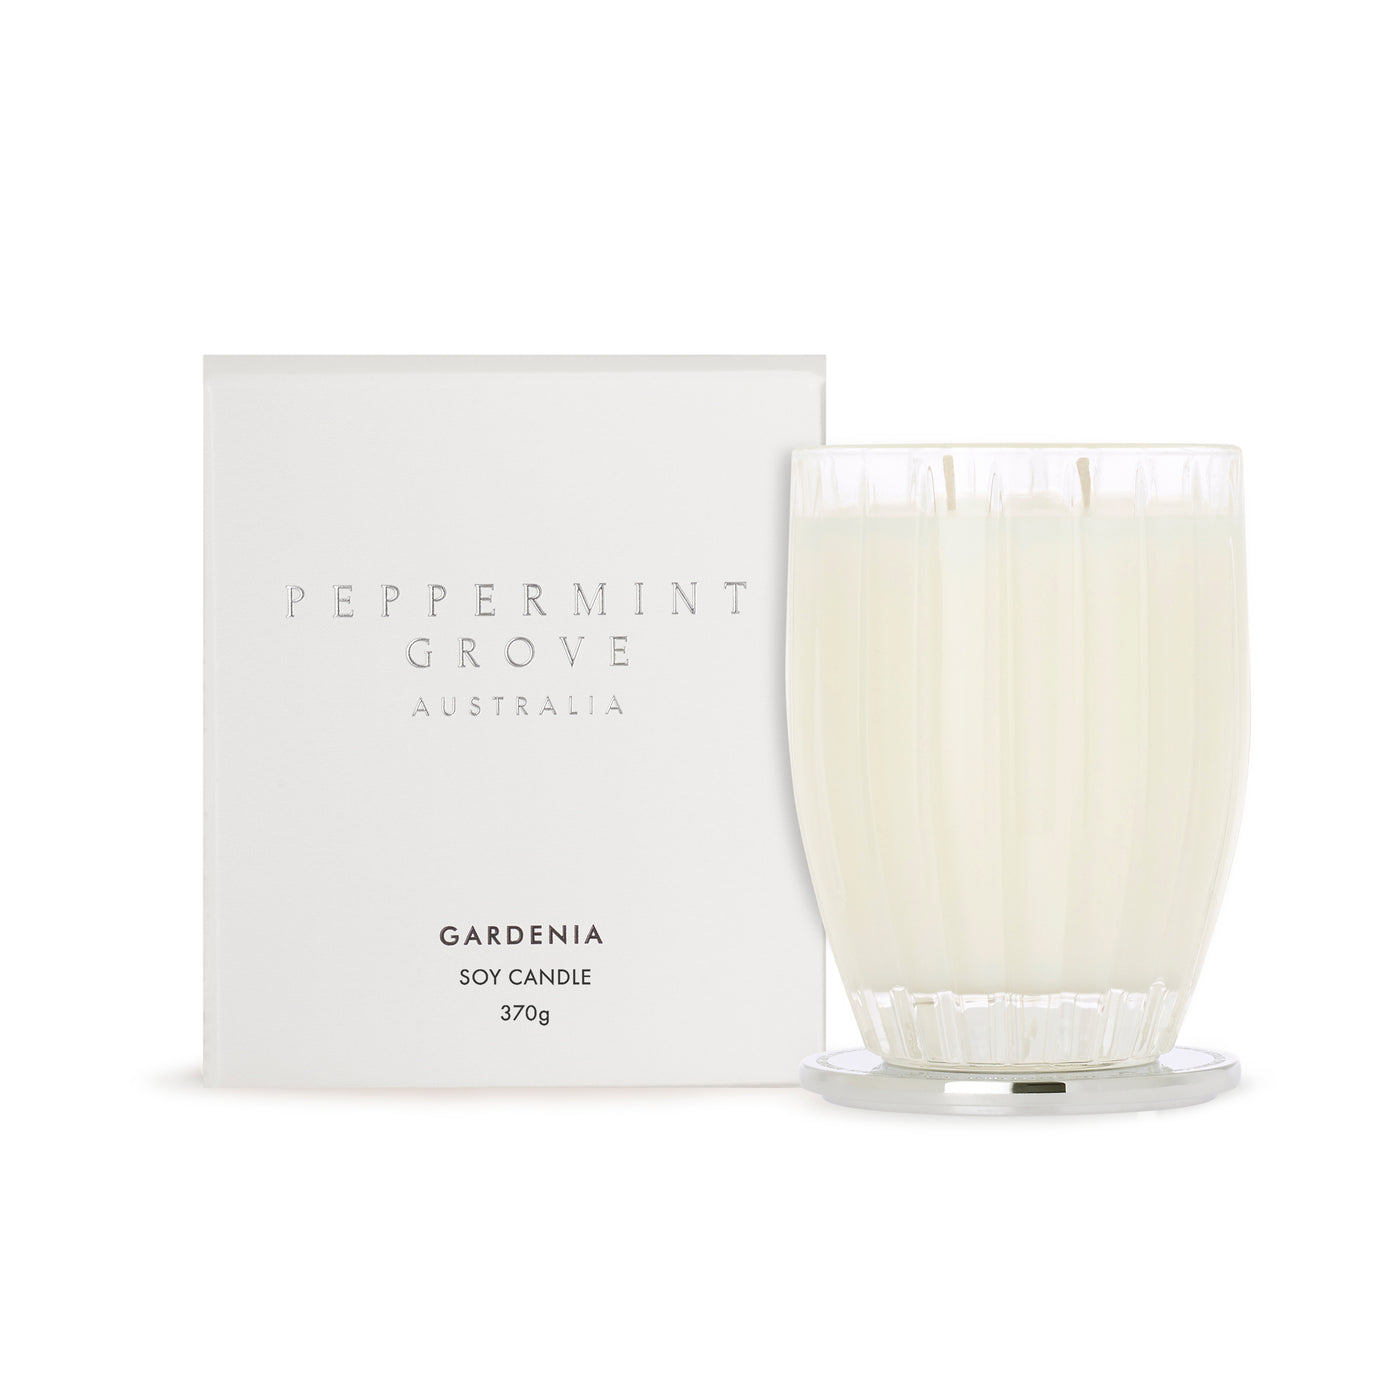 Gardenia Soy Candle- Peppermint Grove